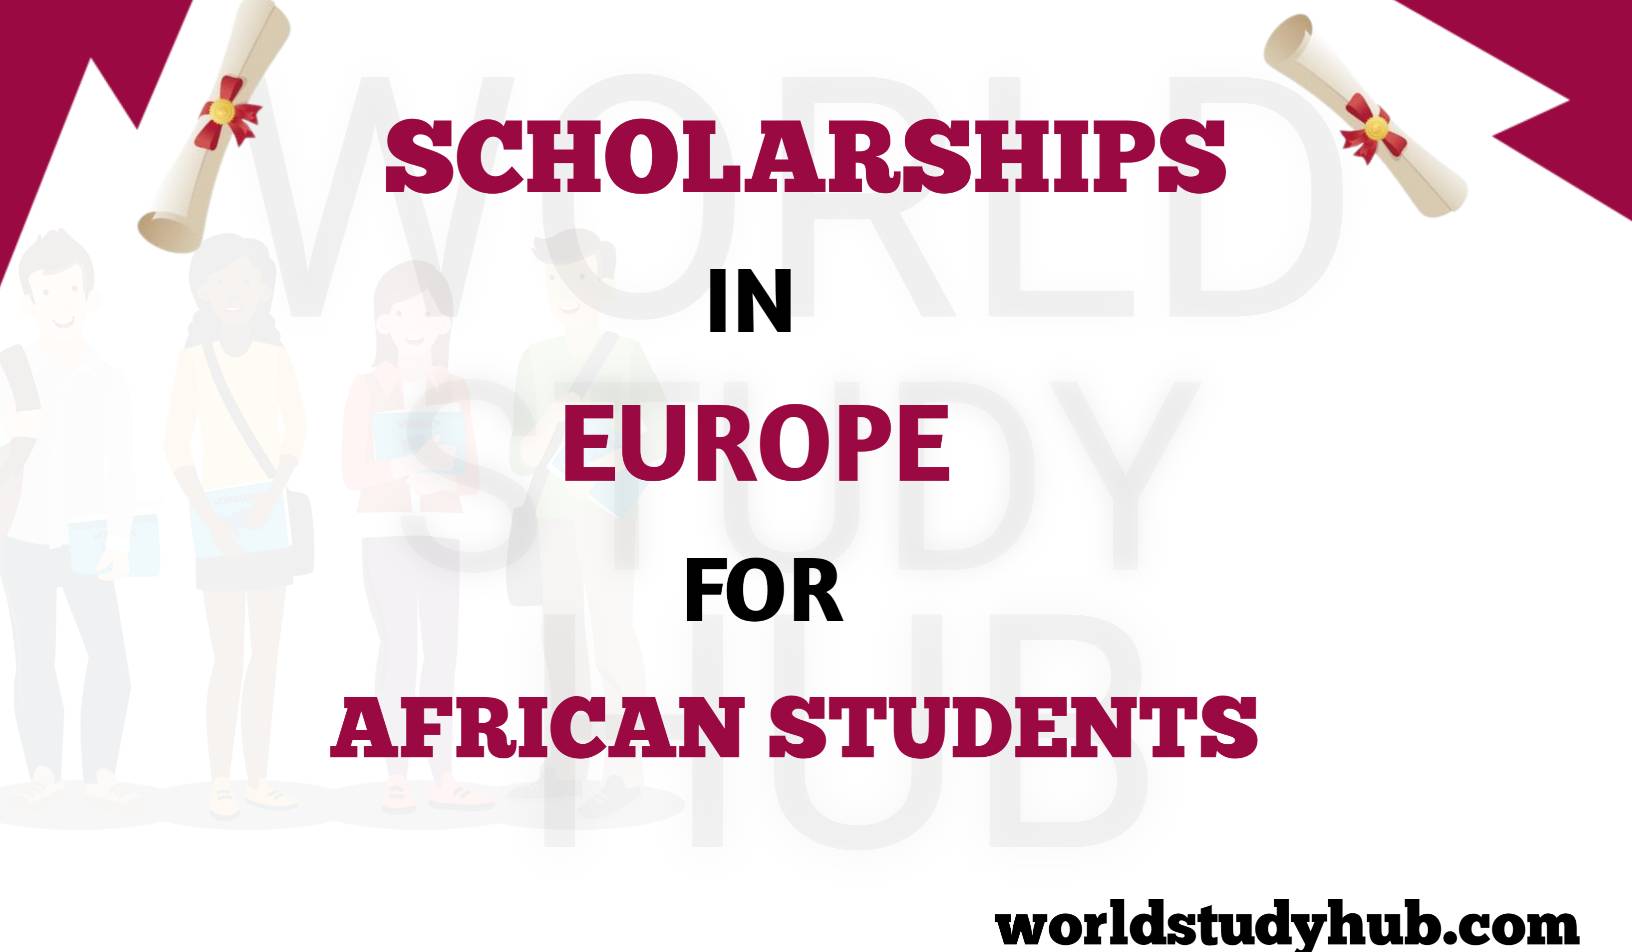 Scholarships-in-Europe-for-African-Students